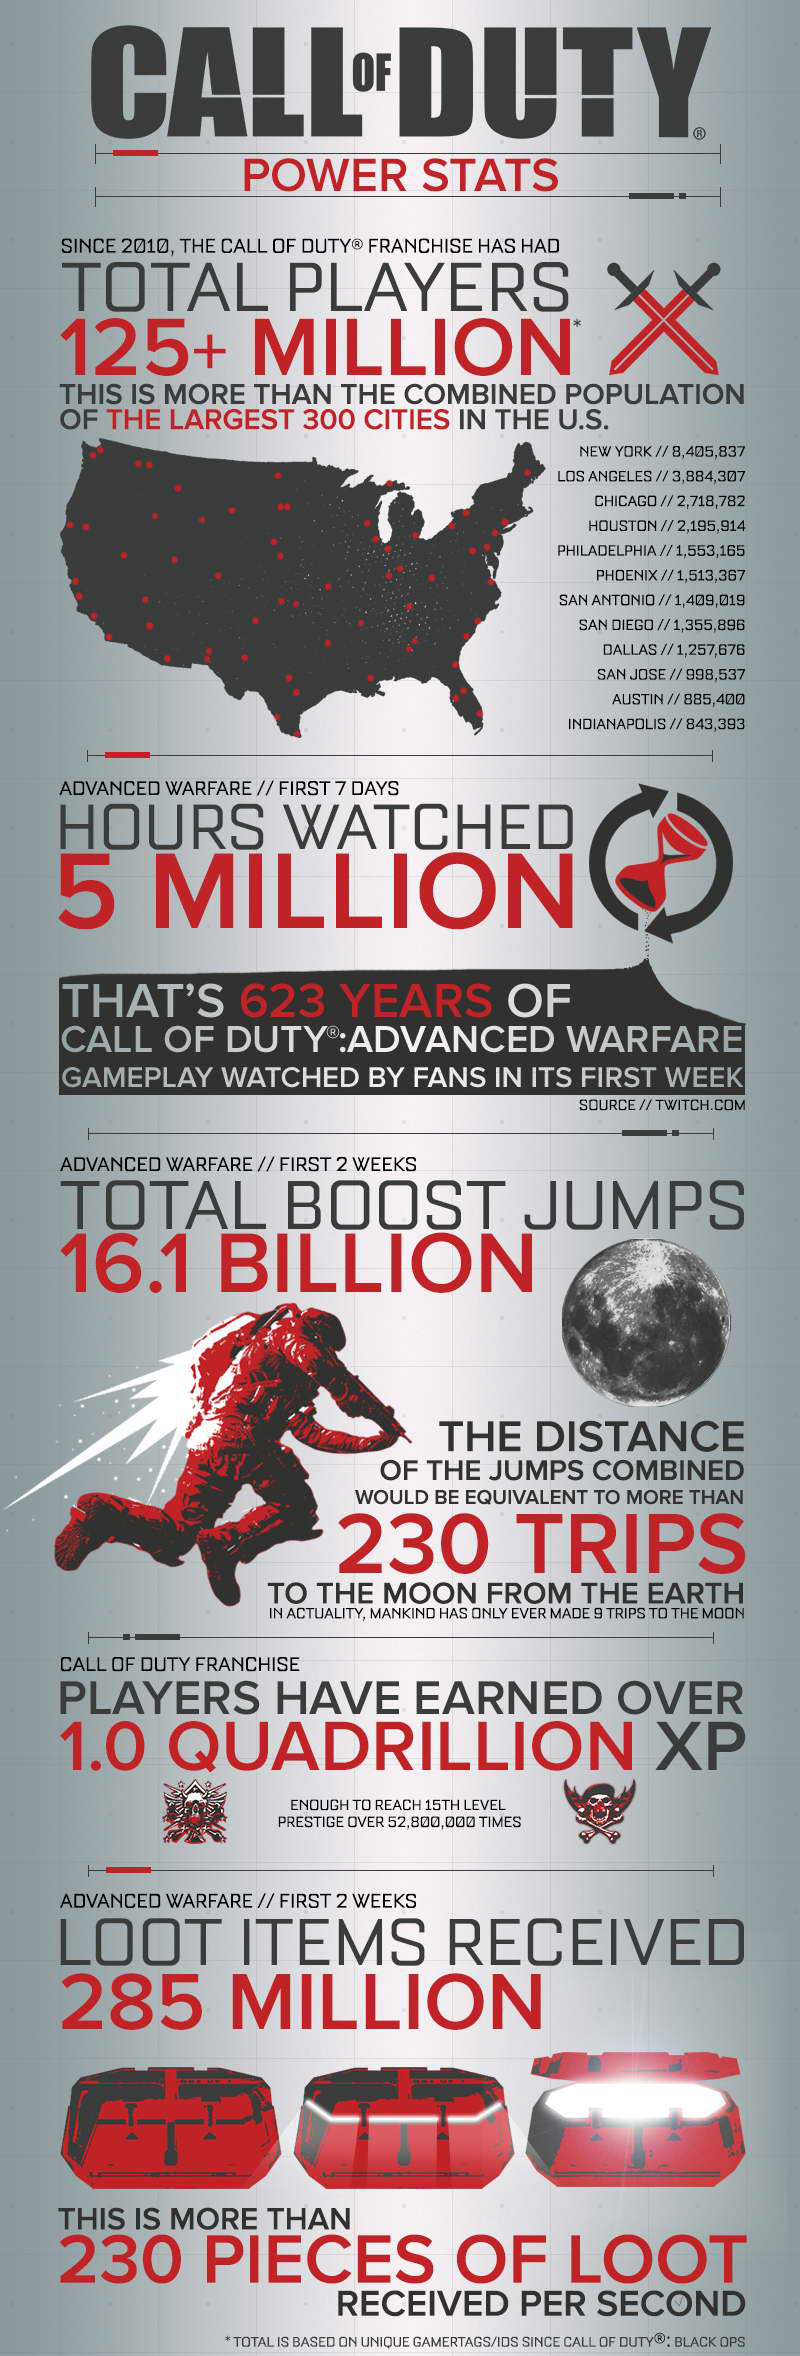 call-of-duty-infographic-01